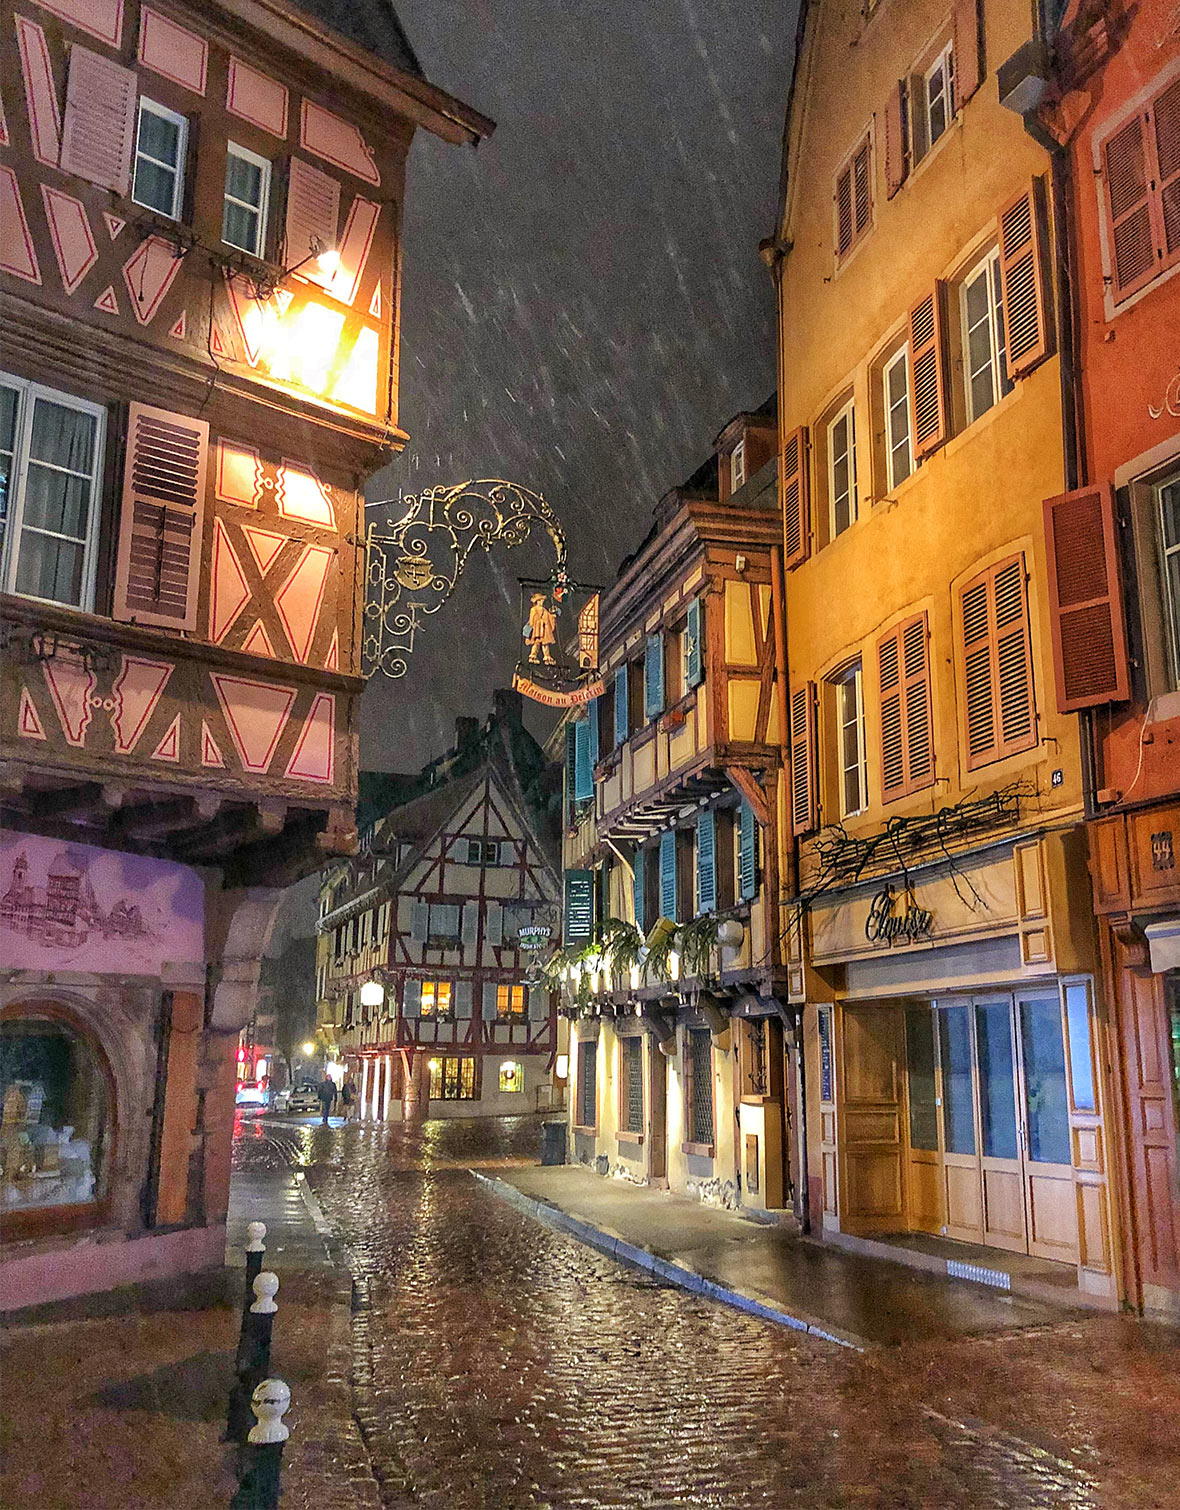 Stopping off in Colmar is always a good idea.